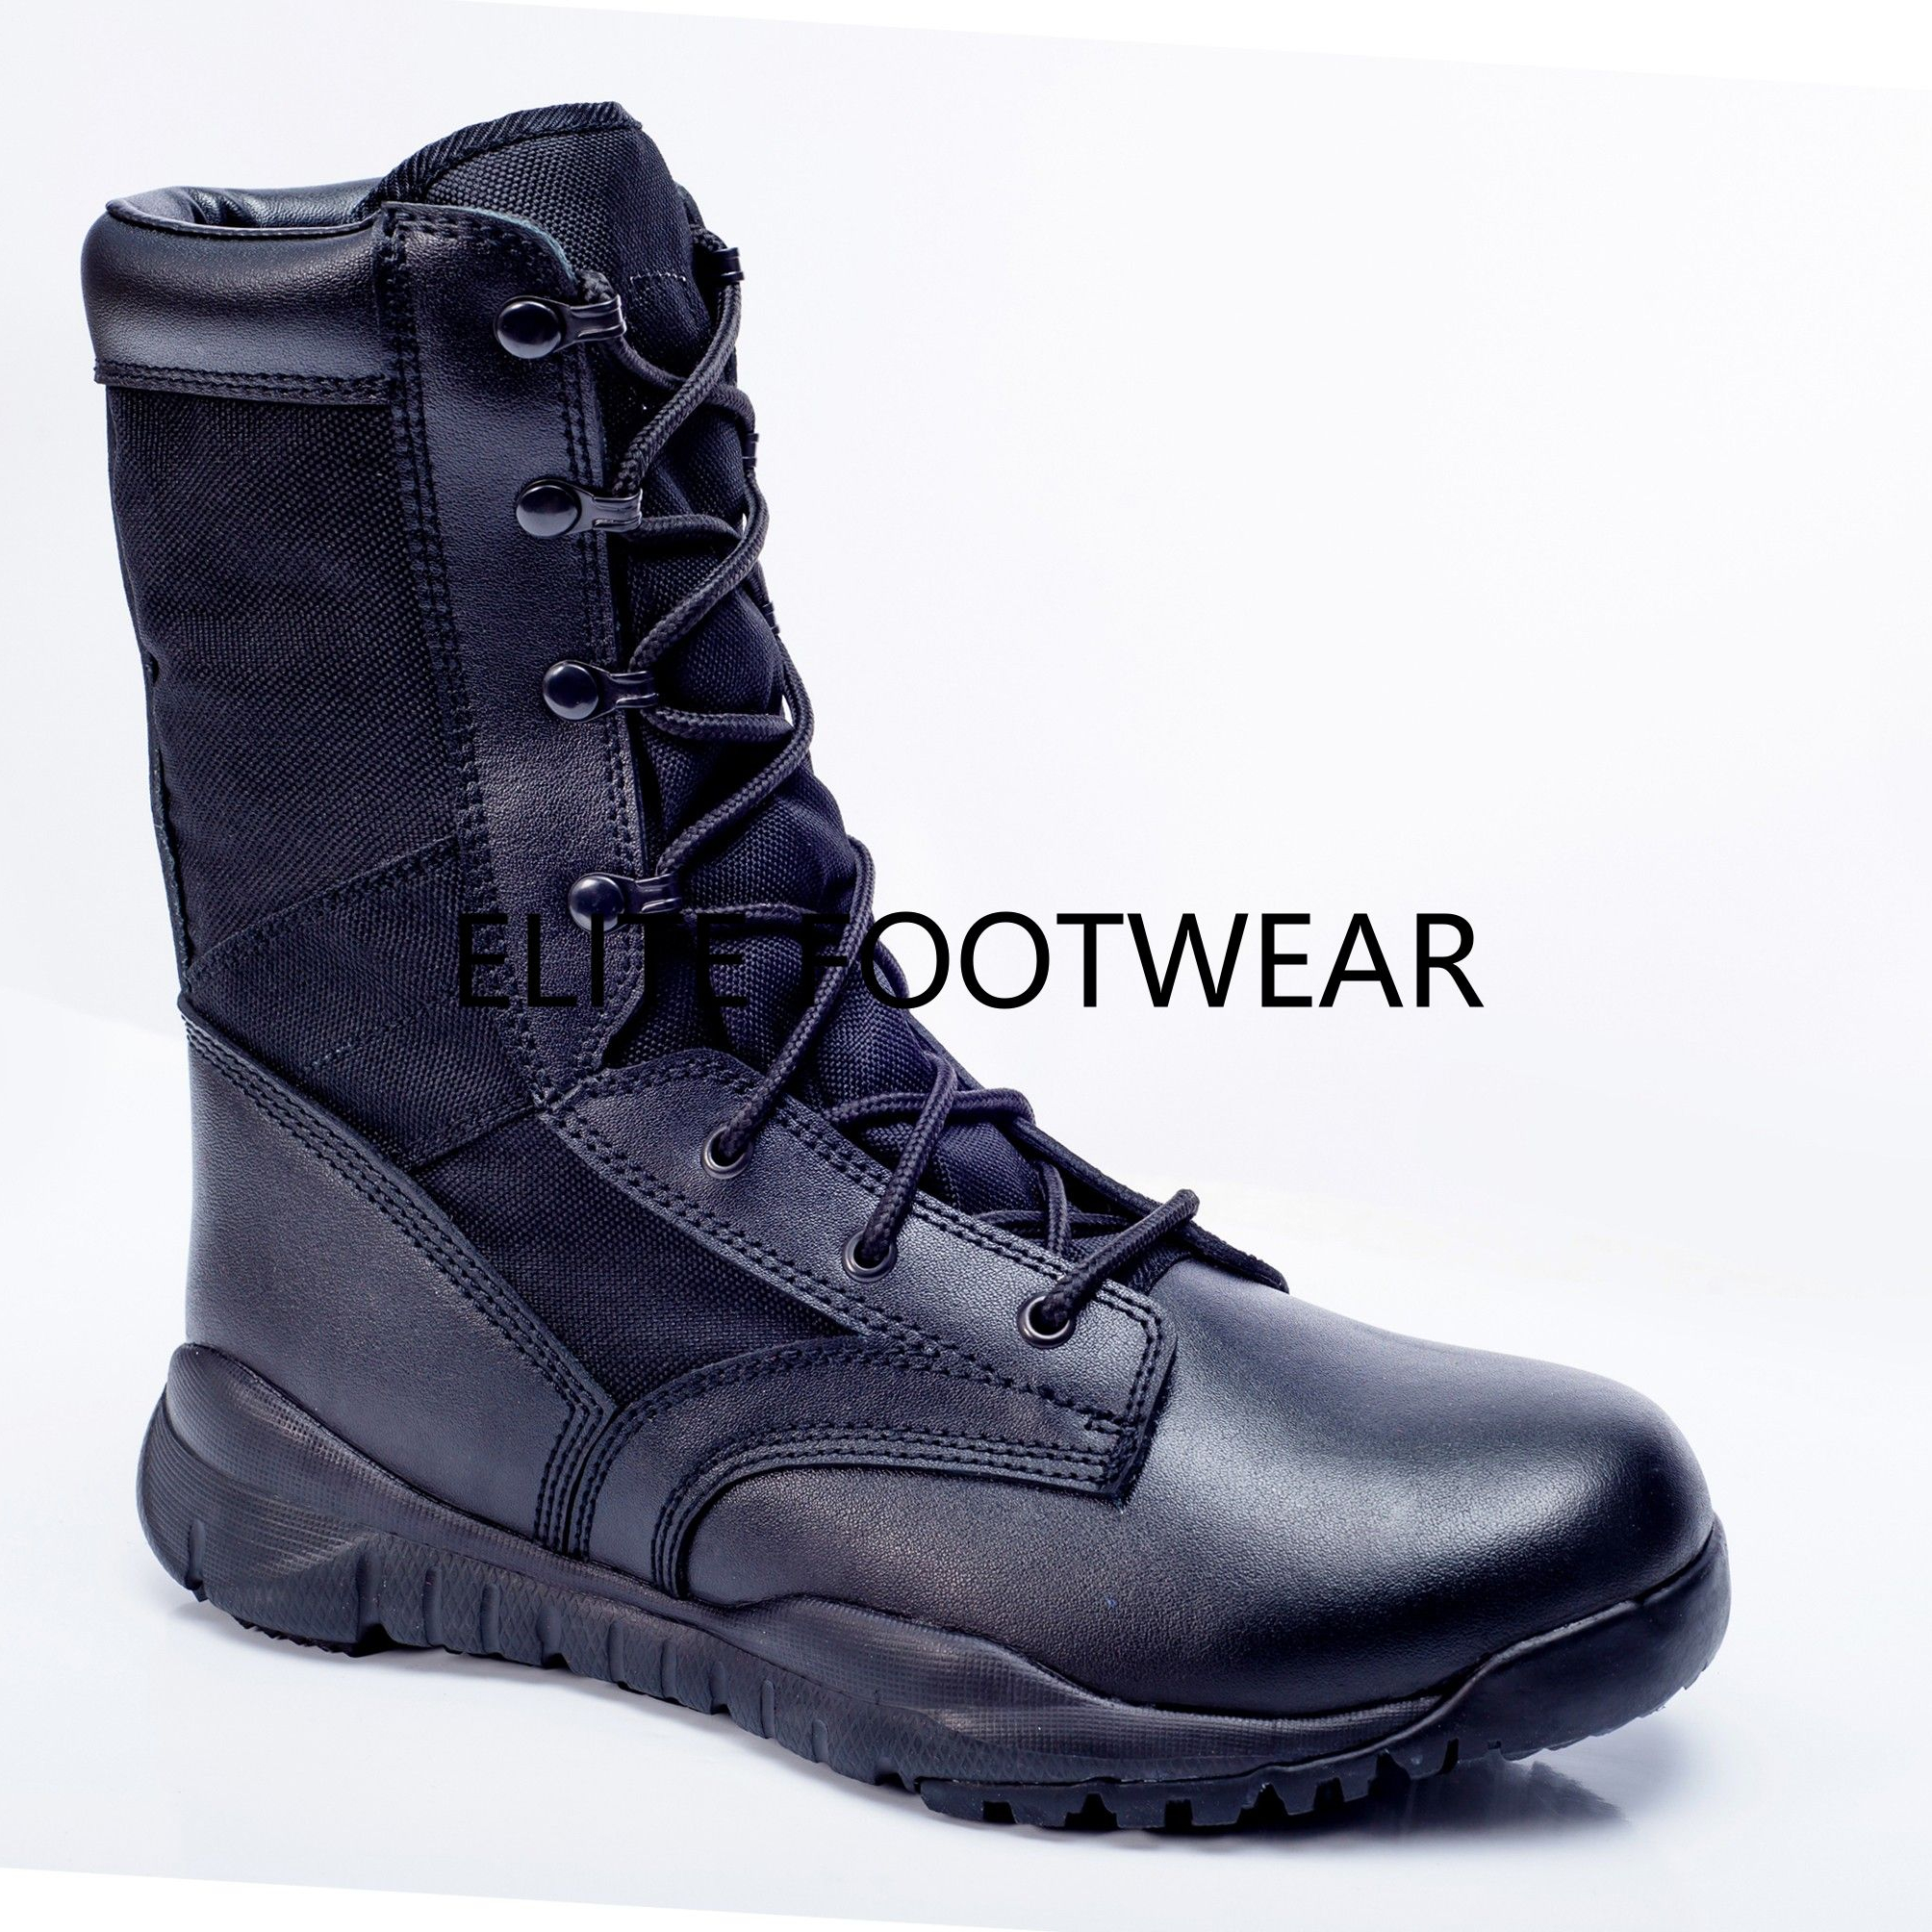 Outdoor Camping Hiking High Top Shoes Desert Combat Military Tactical Boots High Quality botas de seguridad industrial